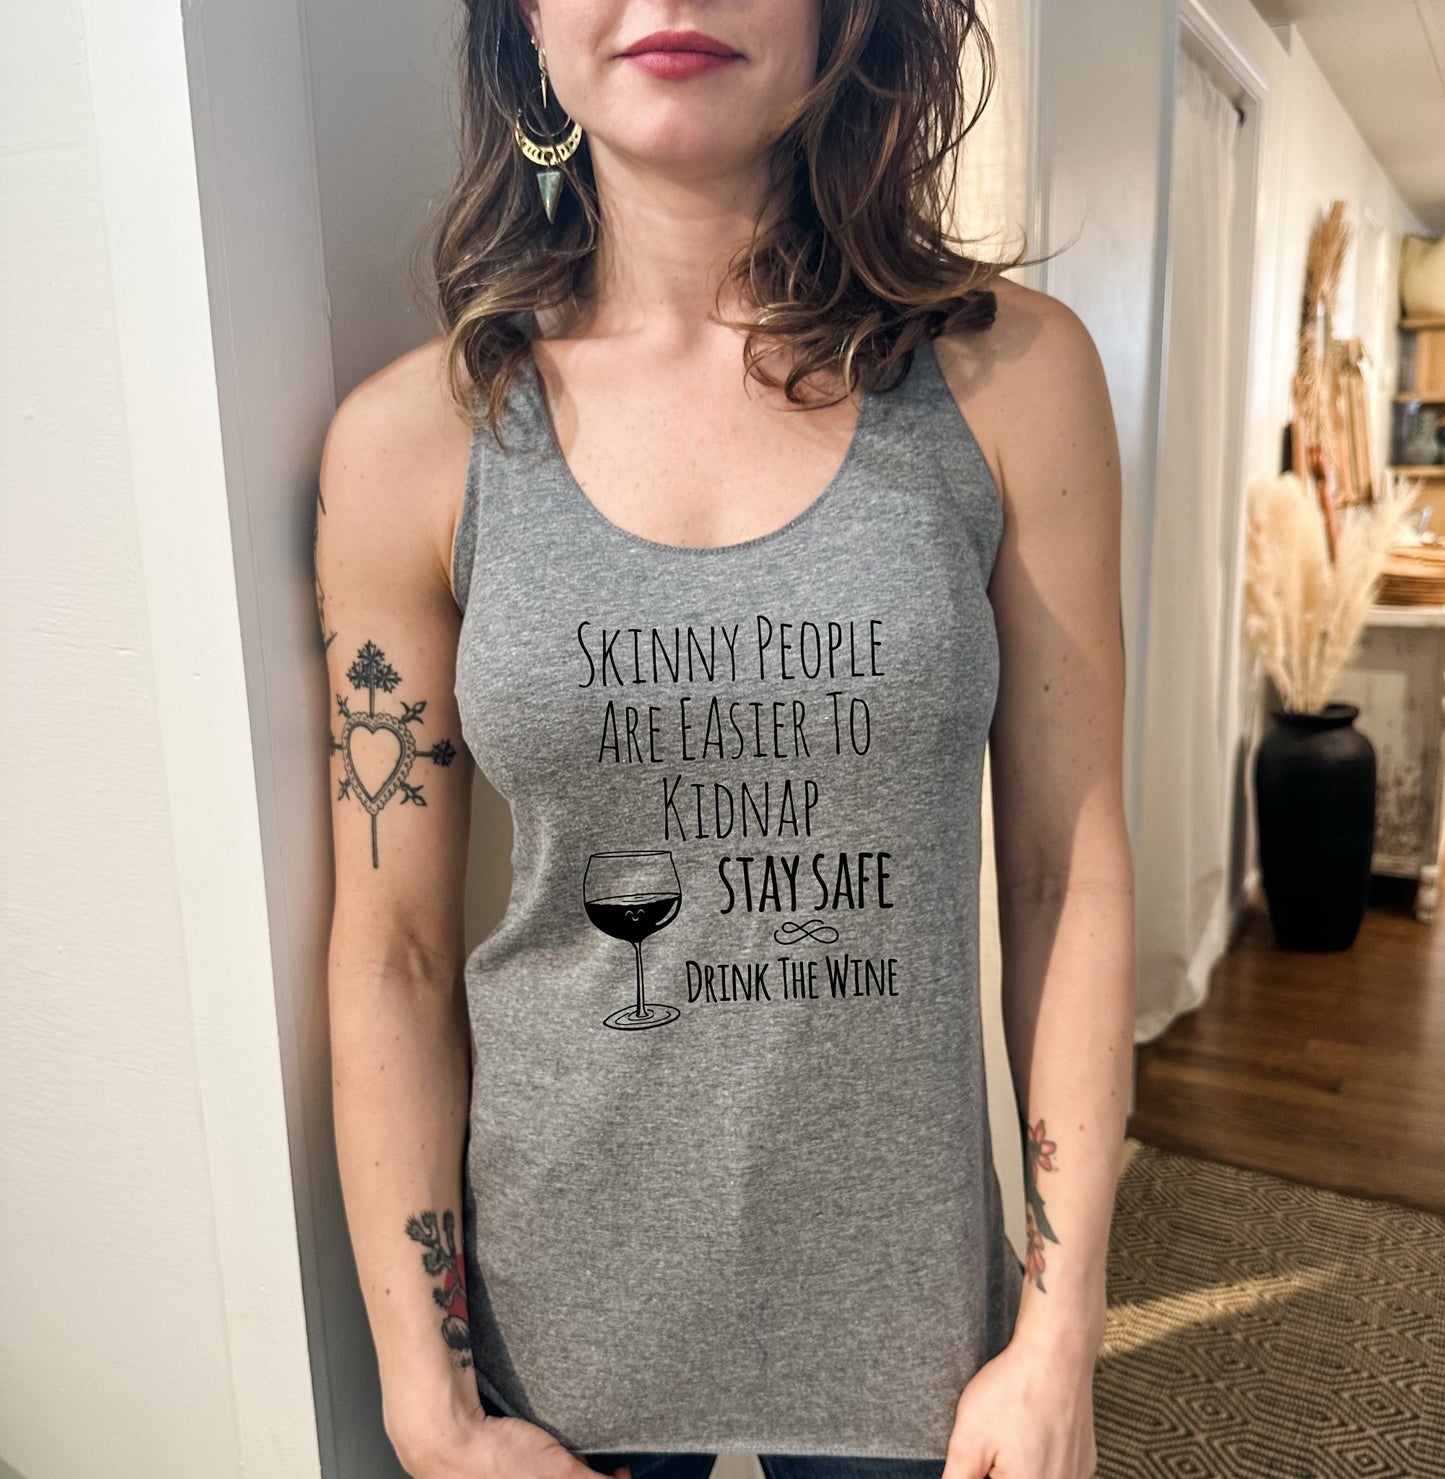 Skinny People Are Easier To Kidnap. Stay Safe. Drink The Wine - Women's Tank - Heather Gray, Tahiti, or Envy